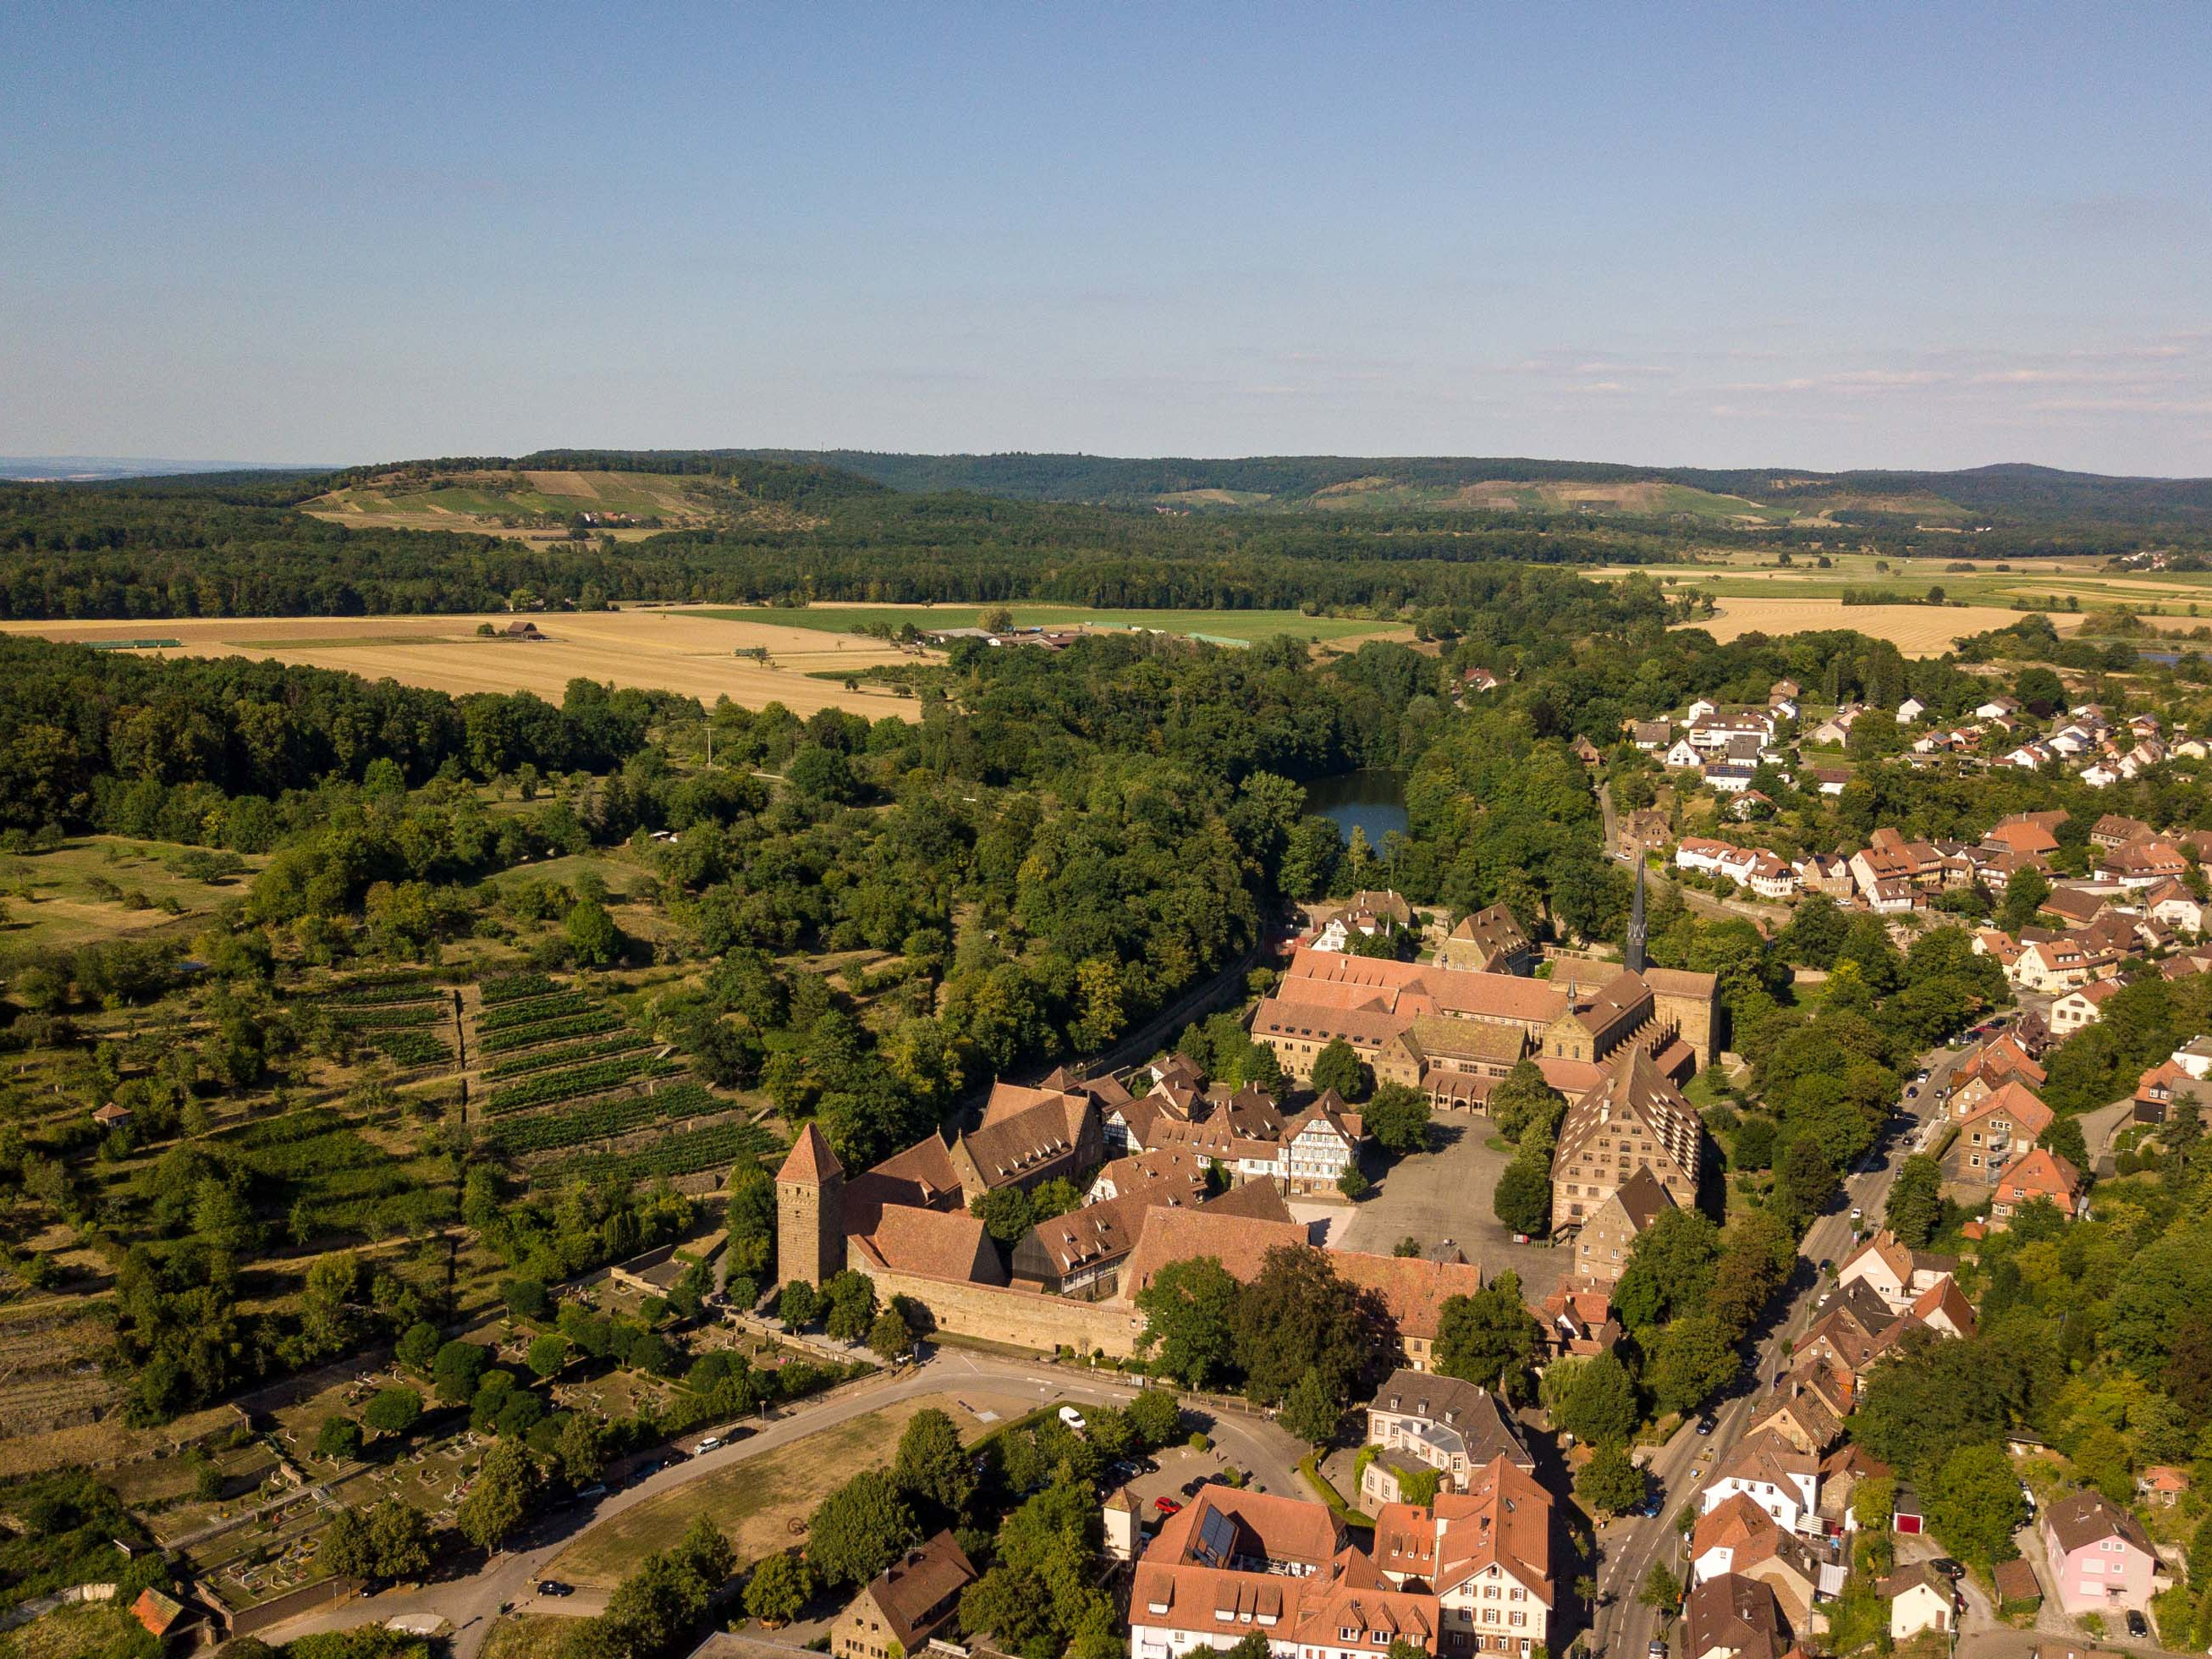 Kloster Maulbronn, Tiefer See, Rossweiher ©Sohl Media